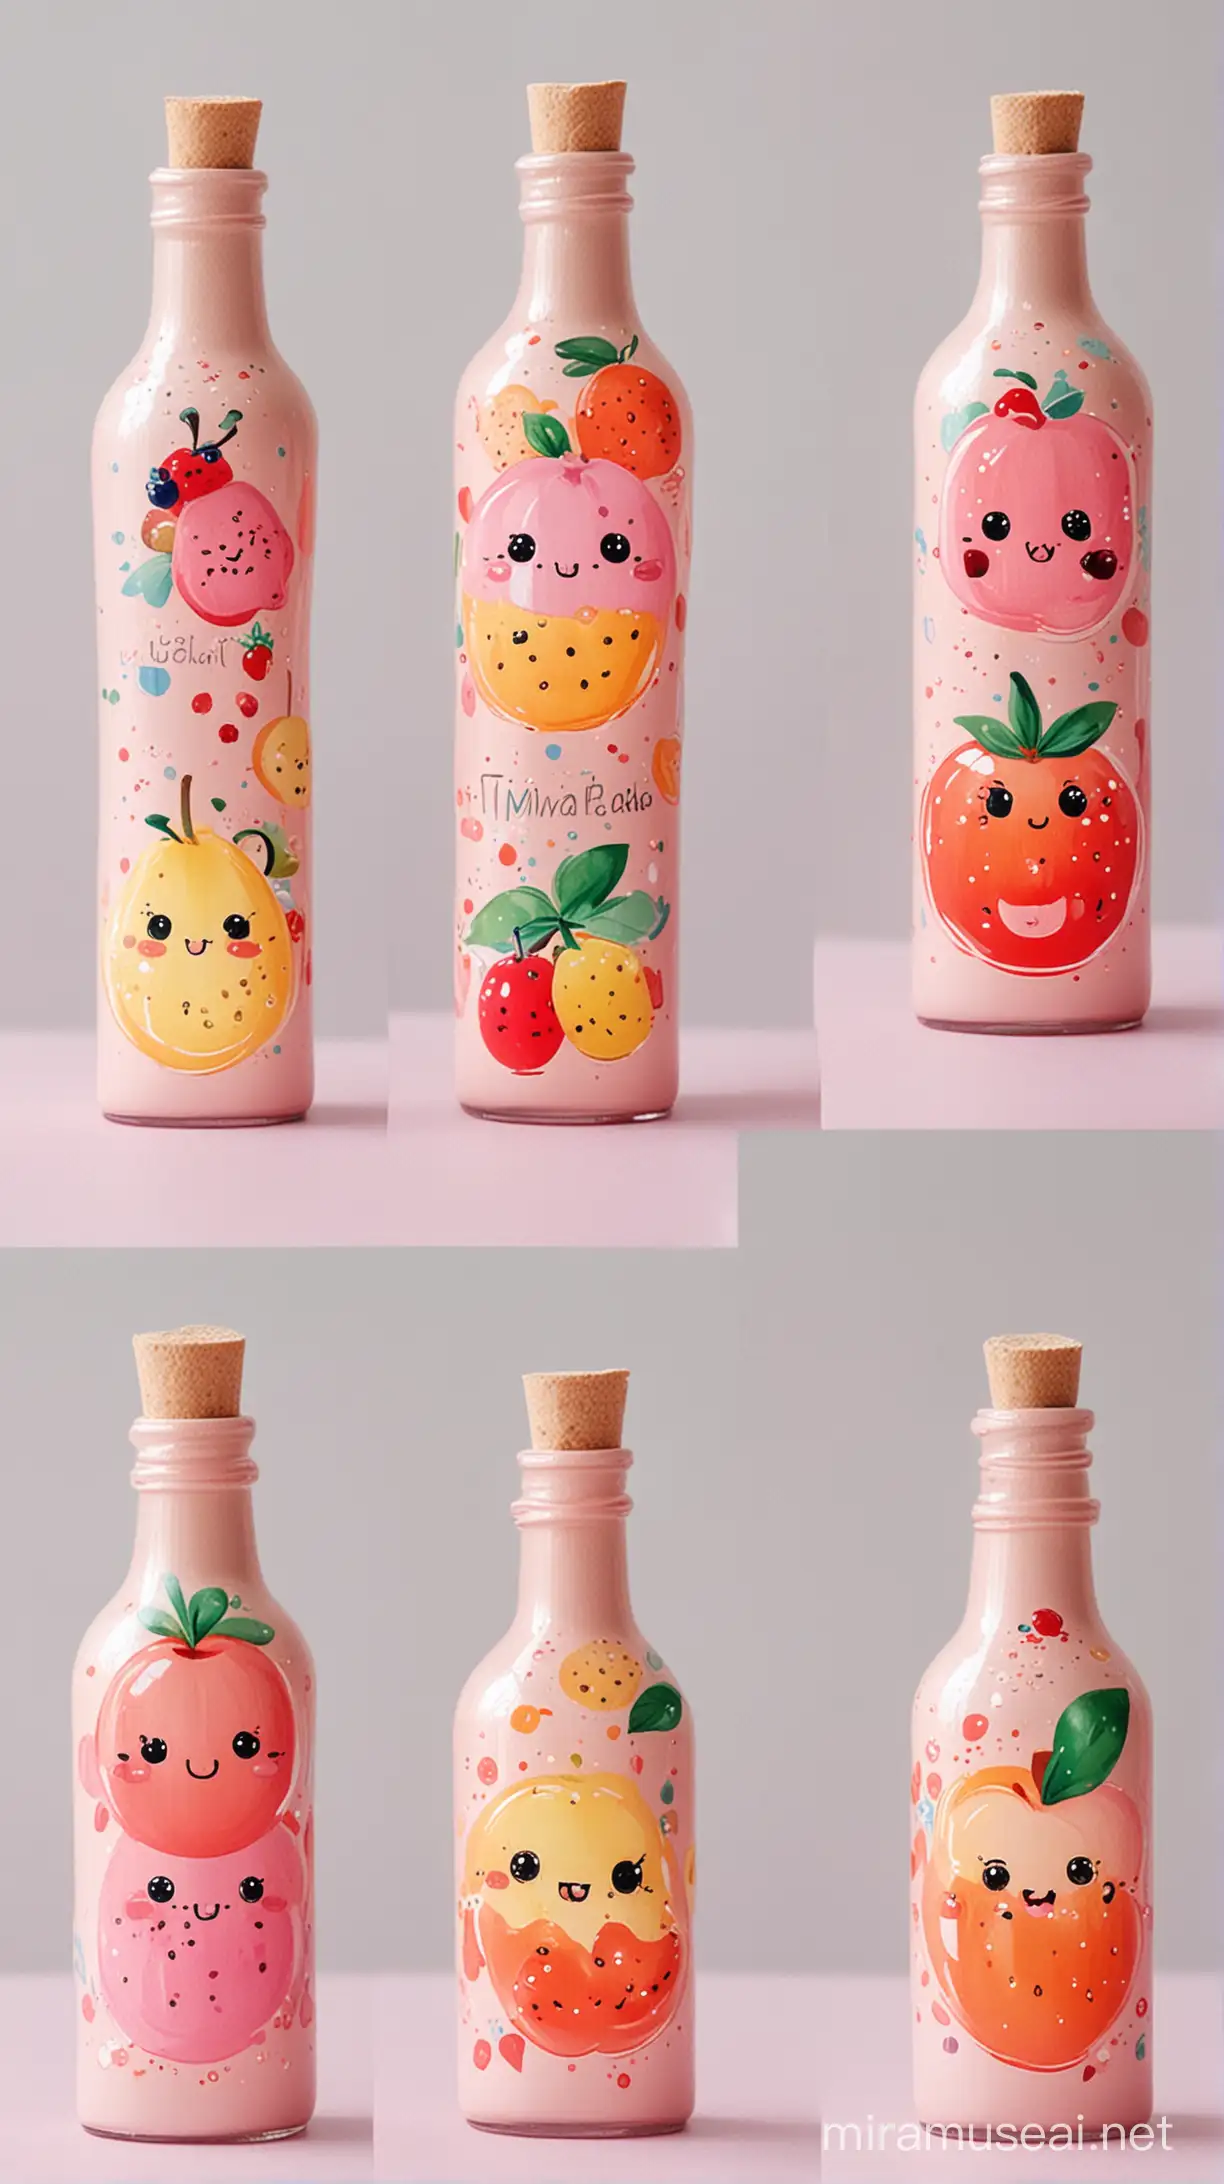 Colorful Painted Bottles Adorned with Cute Kawaii Fruits